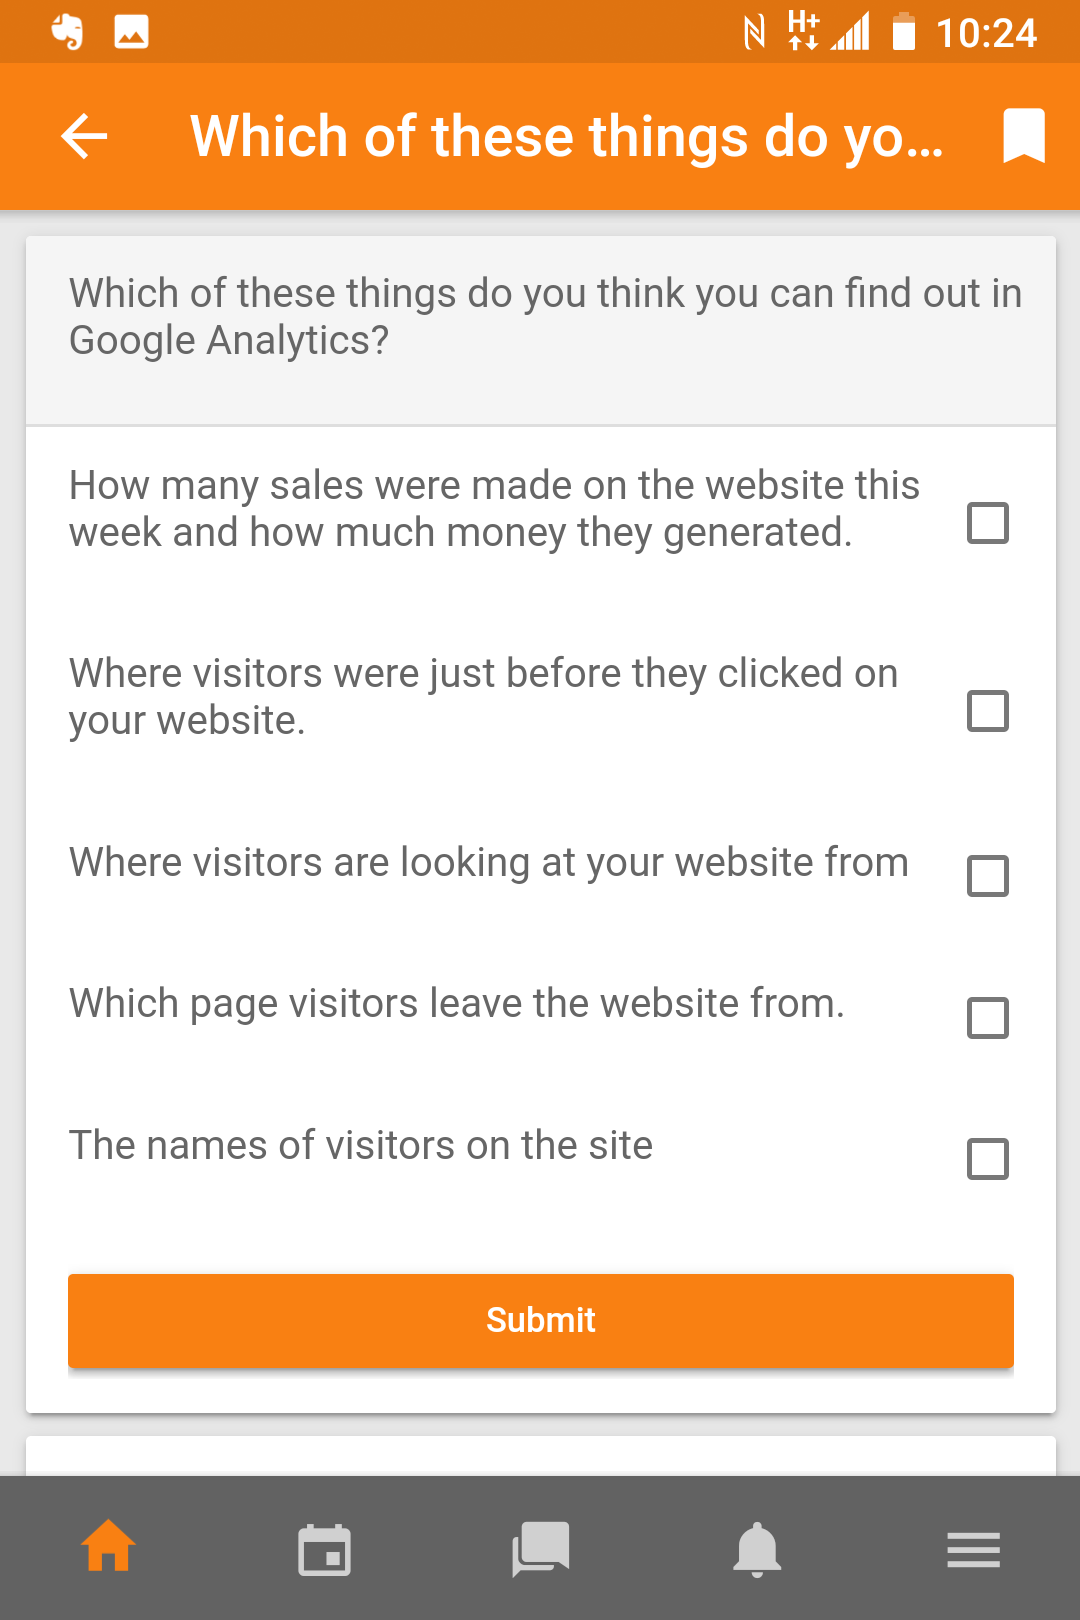 How to use Google Analytics for small businesses - My Own Marketing Coach